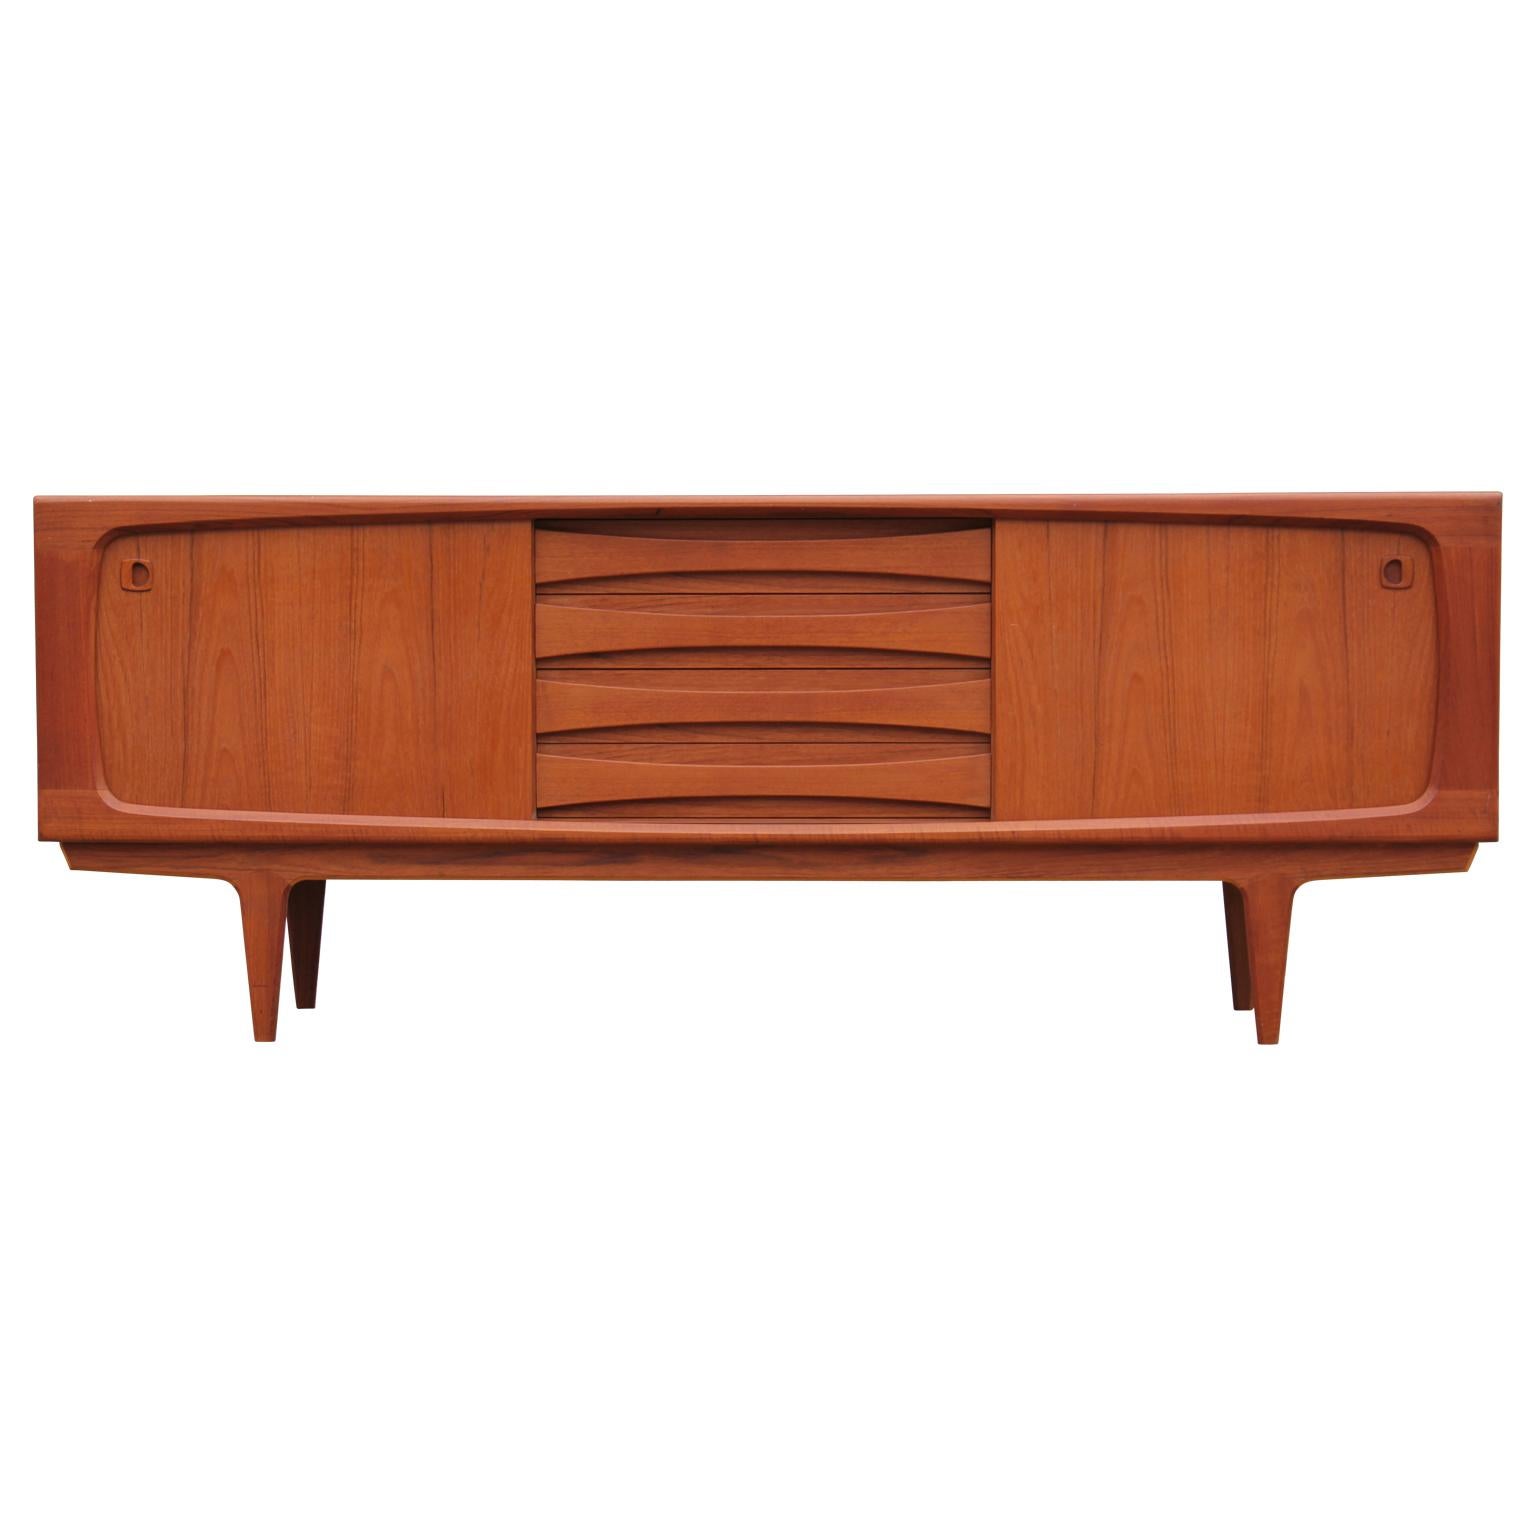 Beautiful modern teak Danish sliding door sideboard or credenza. Would be a great addition to any room, circa 20th century.